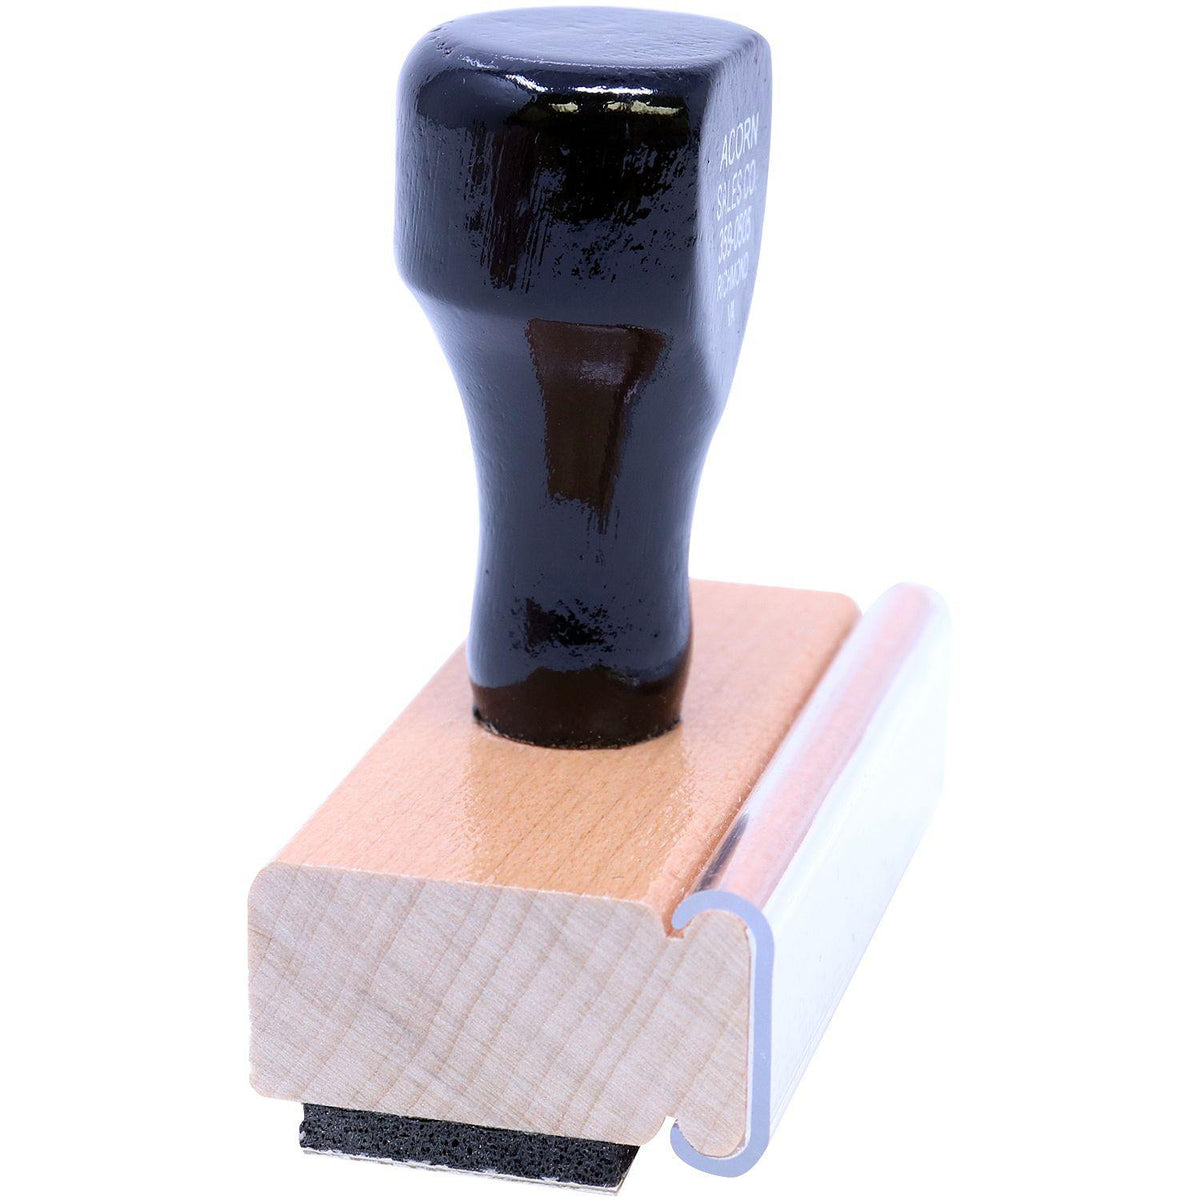 Side View of Large Atencion Inmediata Rubber Stamp at an Angle